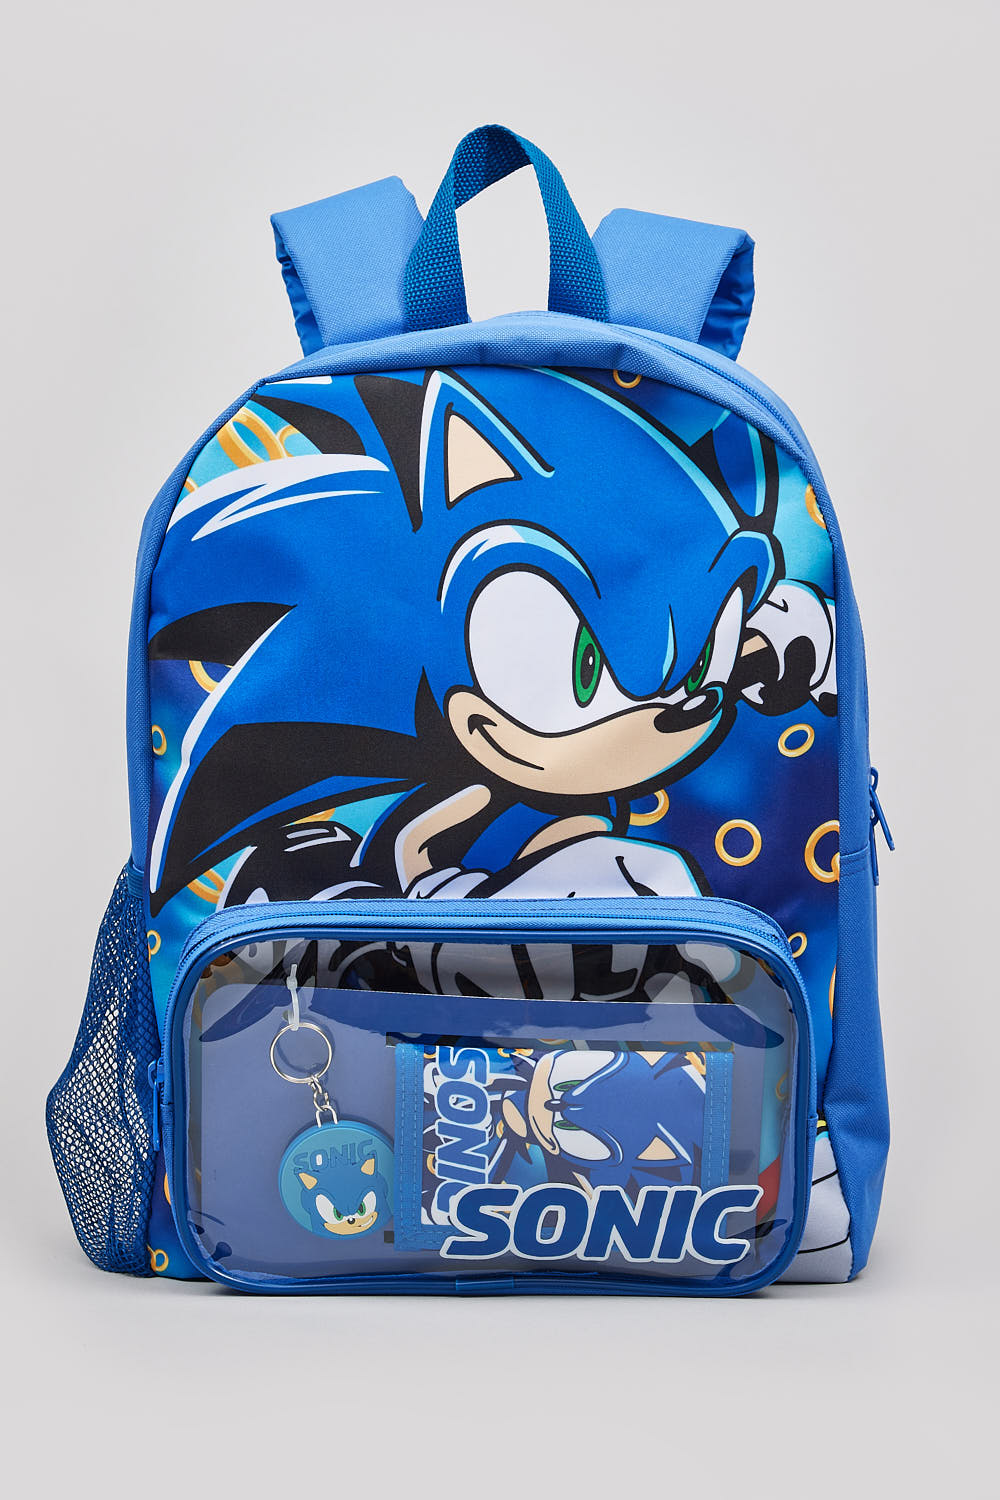 SONIC RINGS BACKPACK, WALLET AND KEYRING SET